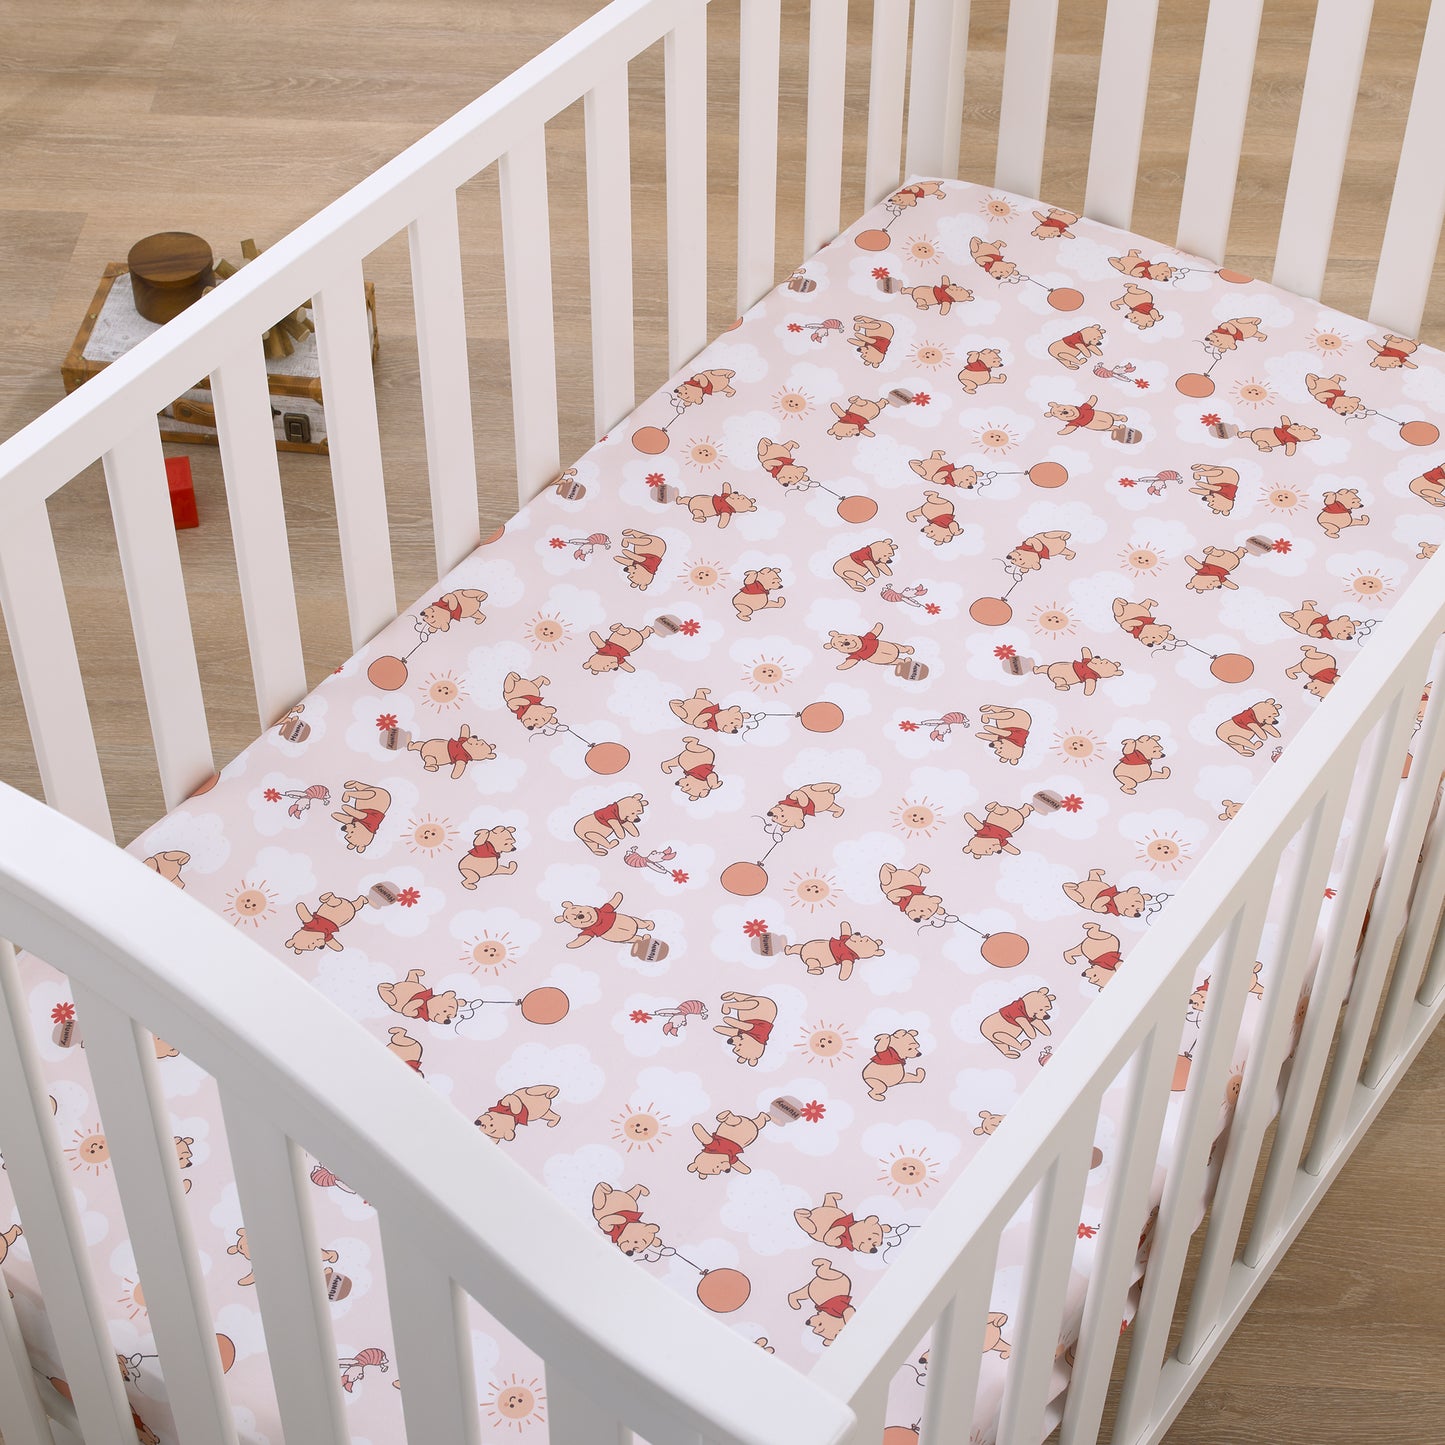 Disney Winnie the Pooh Tan, Red, and White Piglet, Balloons, and Hunny Pots Super Soft Nursery Fitted Crib Sheet